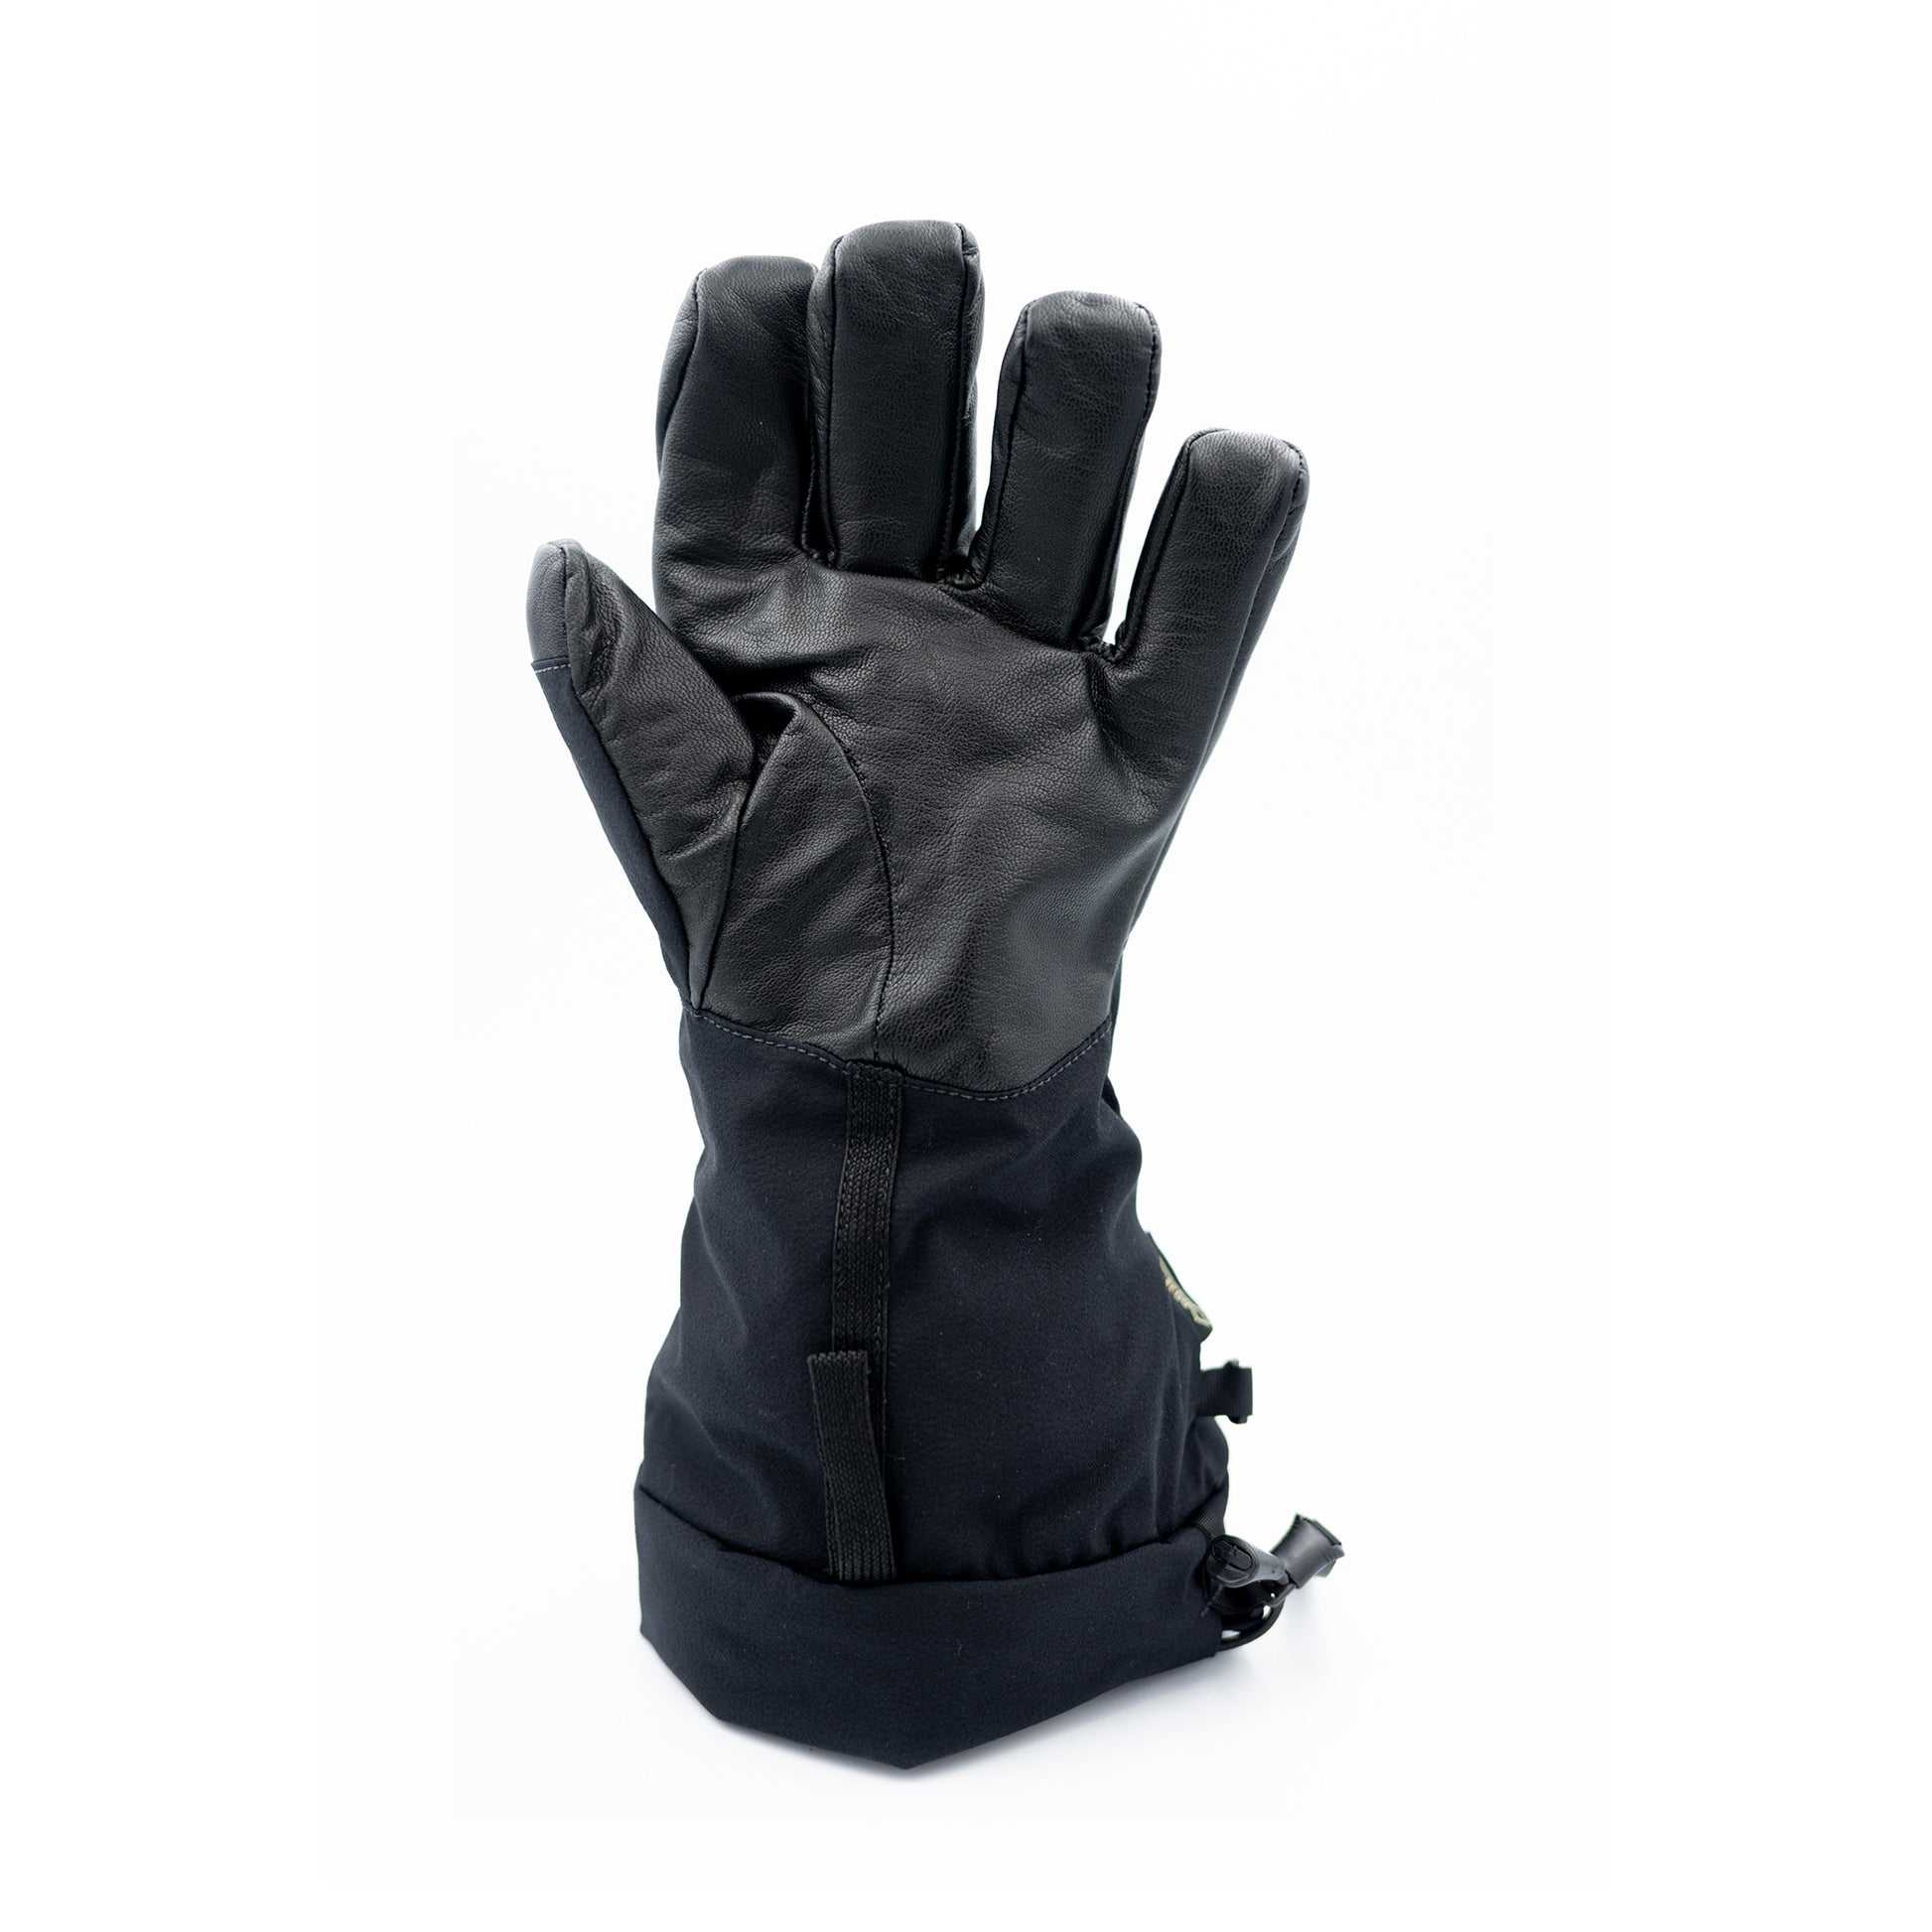 A pair of black Mainers Rangeley Gloves on a white background.